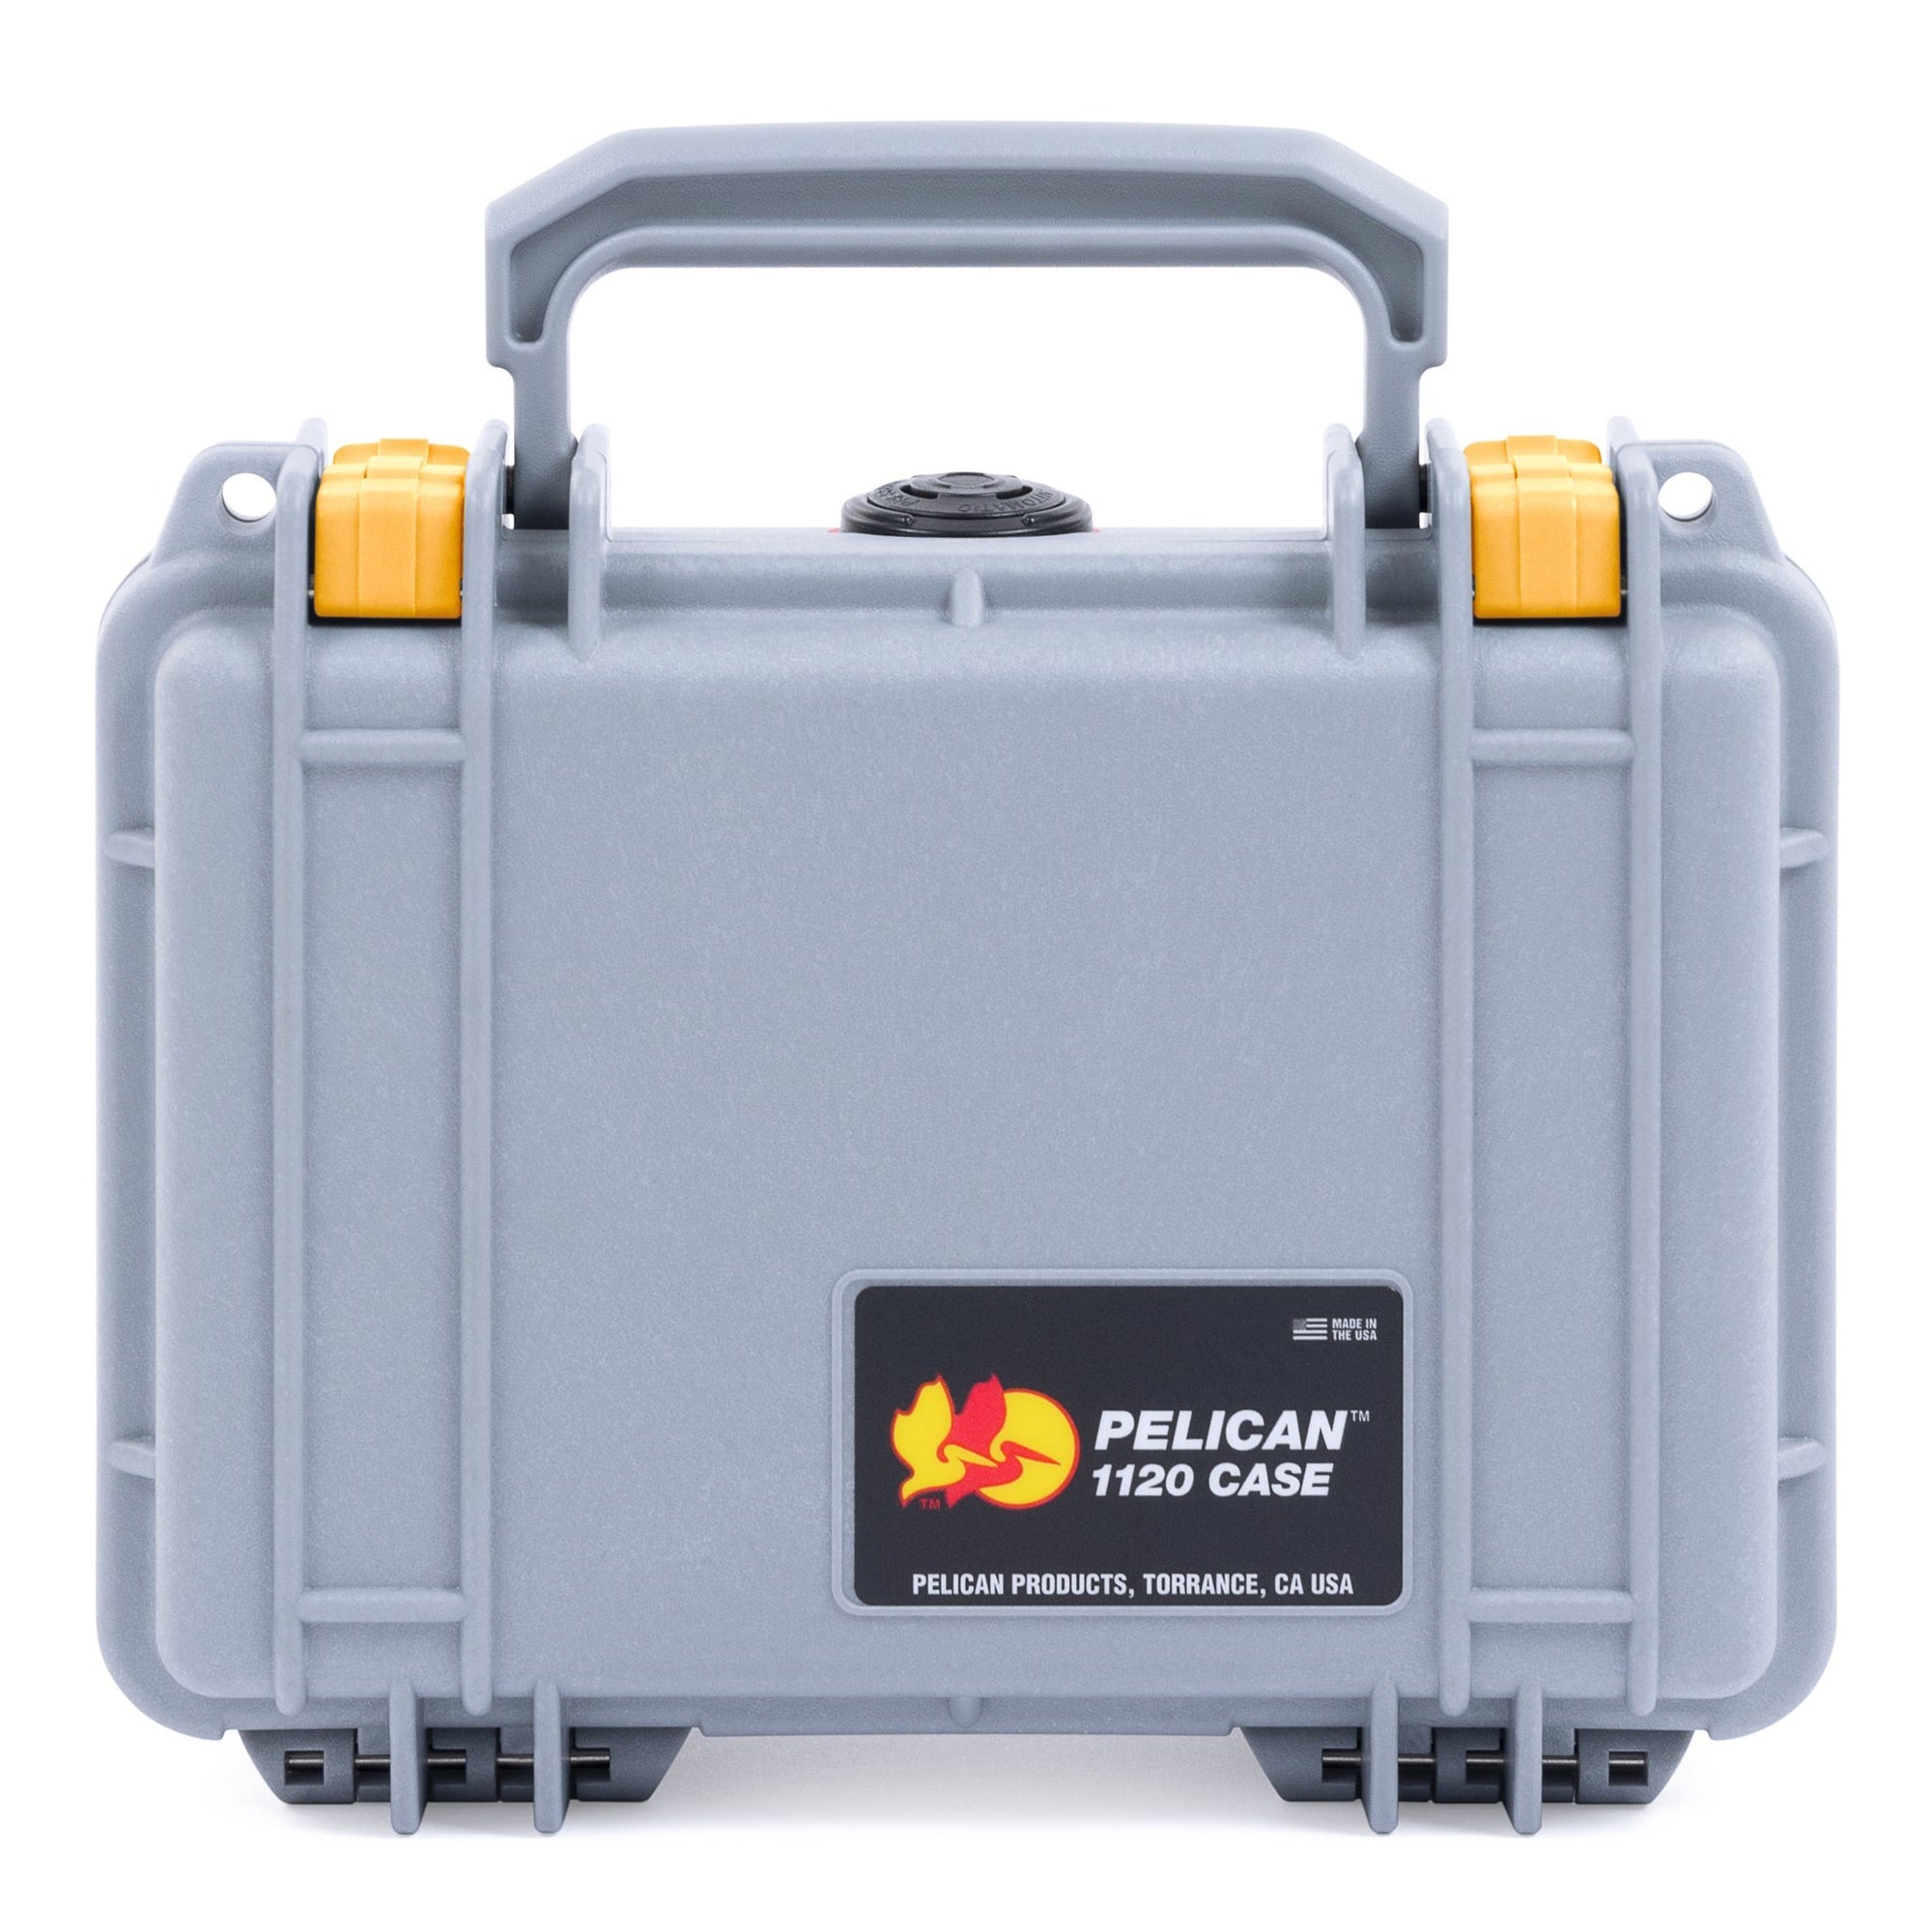 Pelican 1120 Case, Silver with Yellow Latches ColorCase 